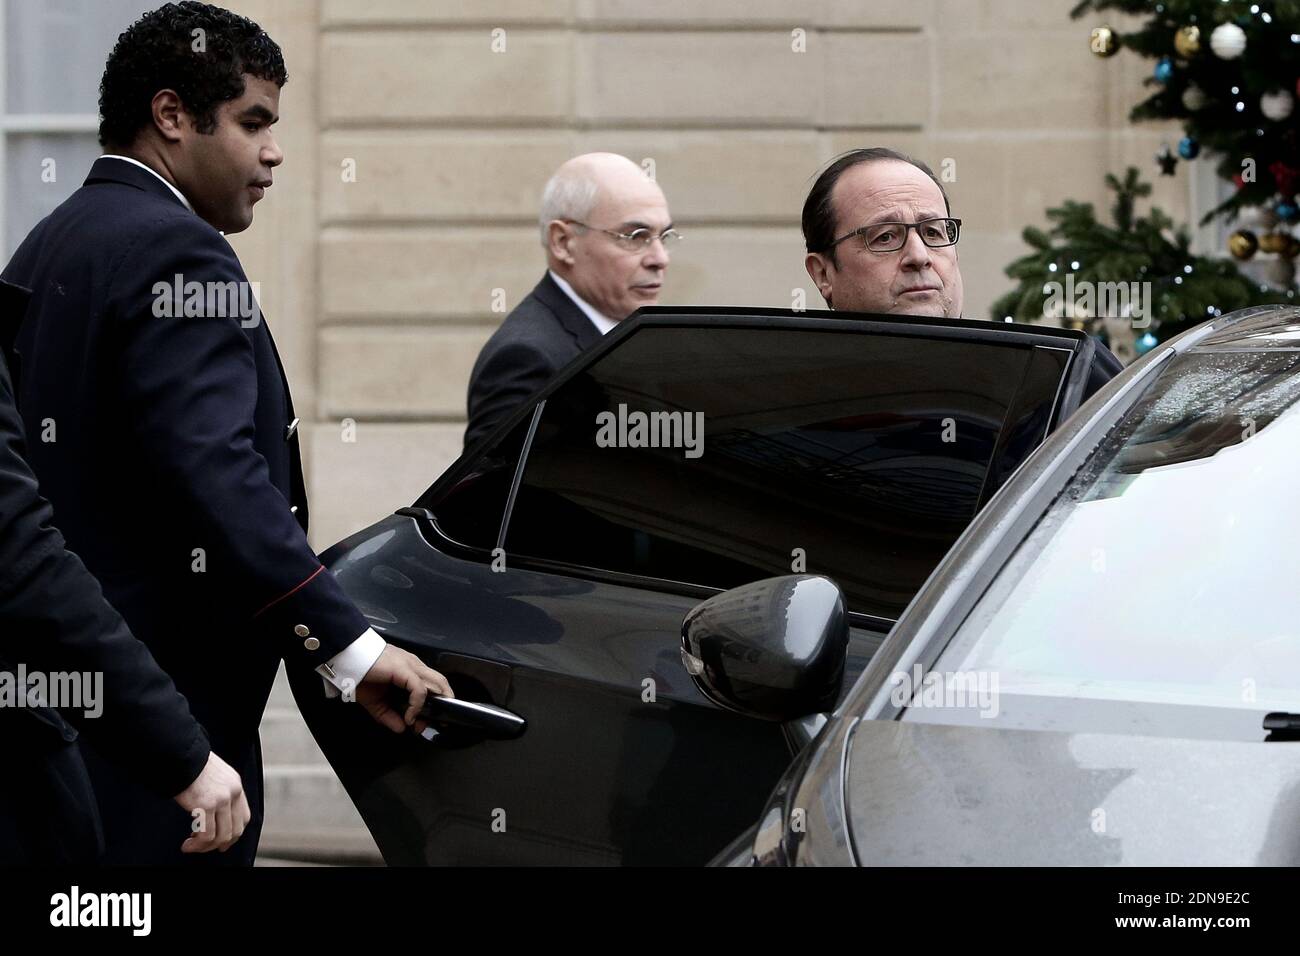 French President Francois Hollande is seen next to Thierry Lataste as he leaves the Elysee Palace and heads to the shooting scene at the Paris offices of satirical weekly Charlie Hebdo, in Paris, France on January 7, 2015. At least 12 people were killed - including two police officers - and 5 injured when two heavily armed gunmen stormed the offices. The magazine is most famous internationally for publishing a controversial series of cartoons depicting the Prophet Mohammed in 2012. Photo by Stephane Lemouton/ABACAPRESS.COM Stock Photo